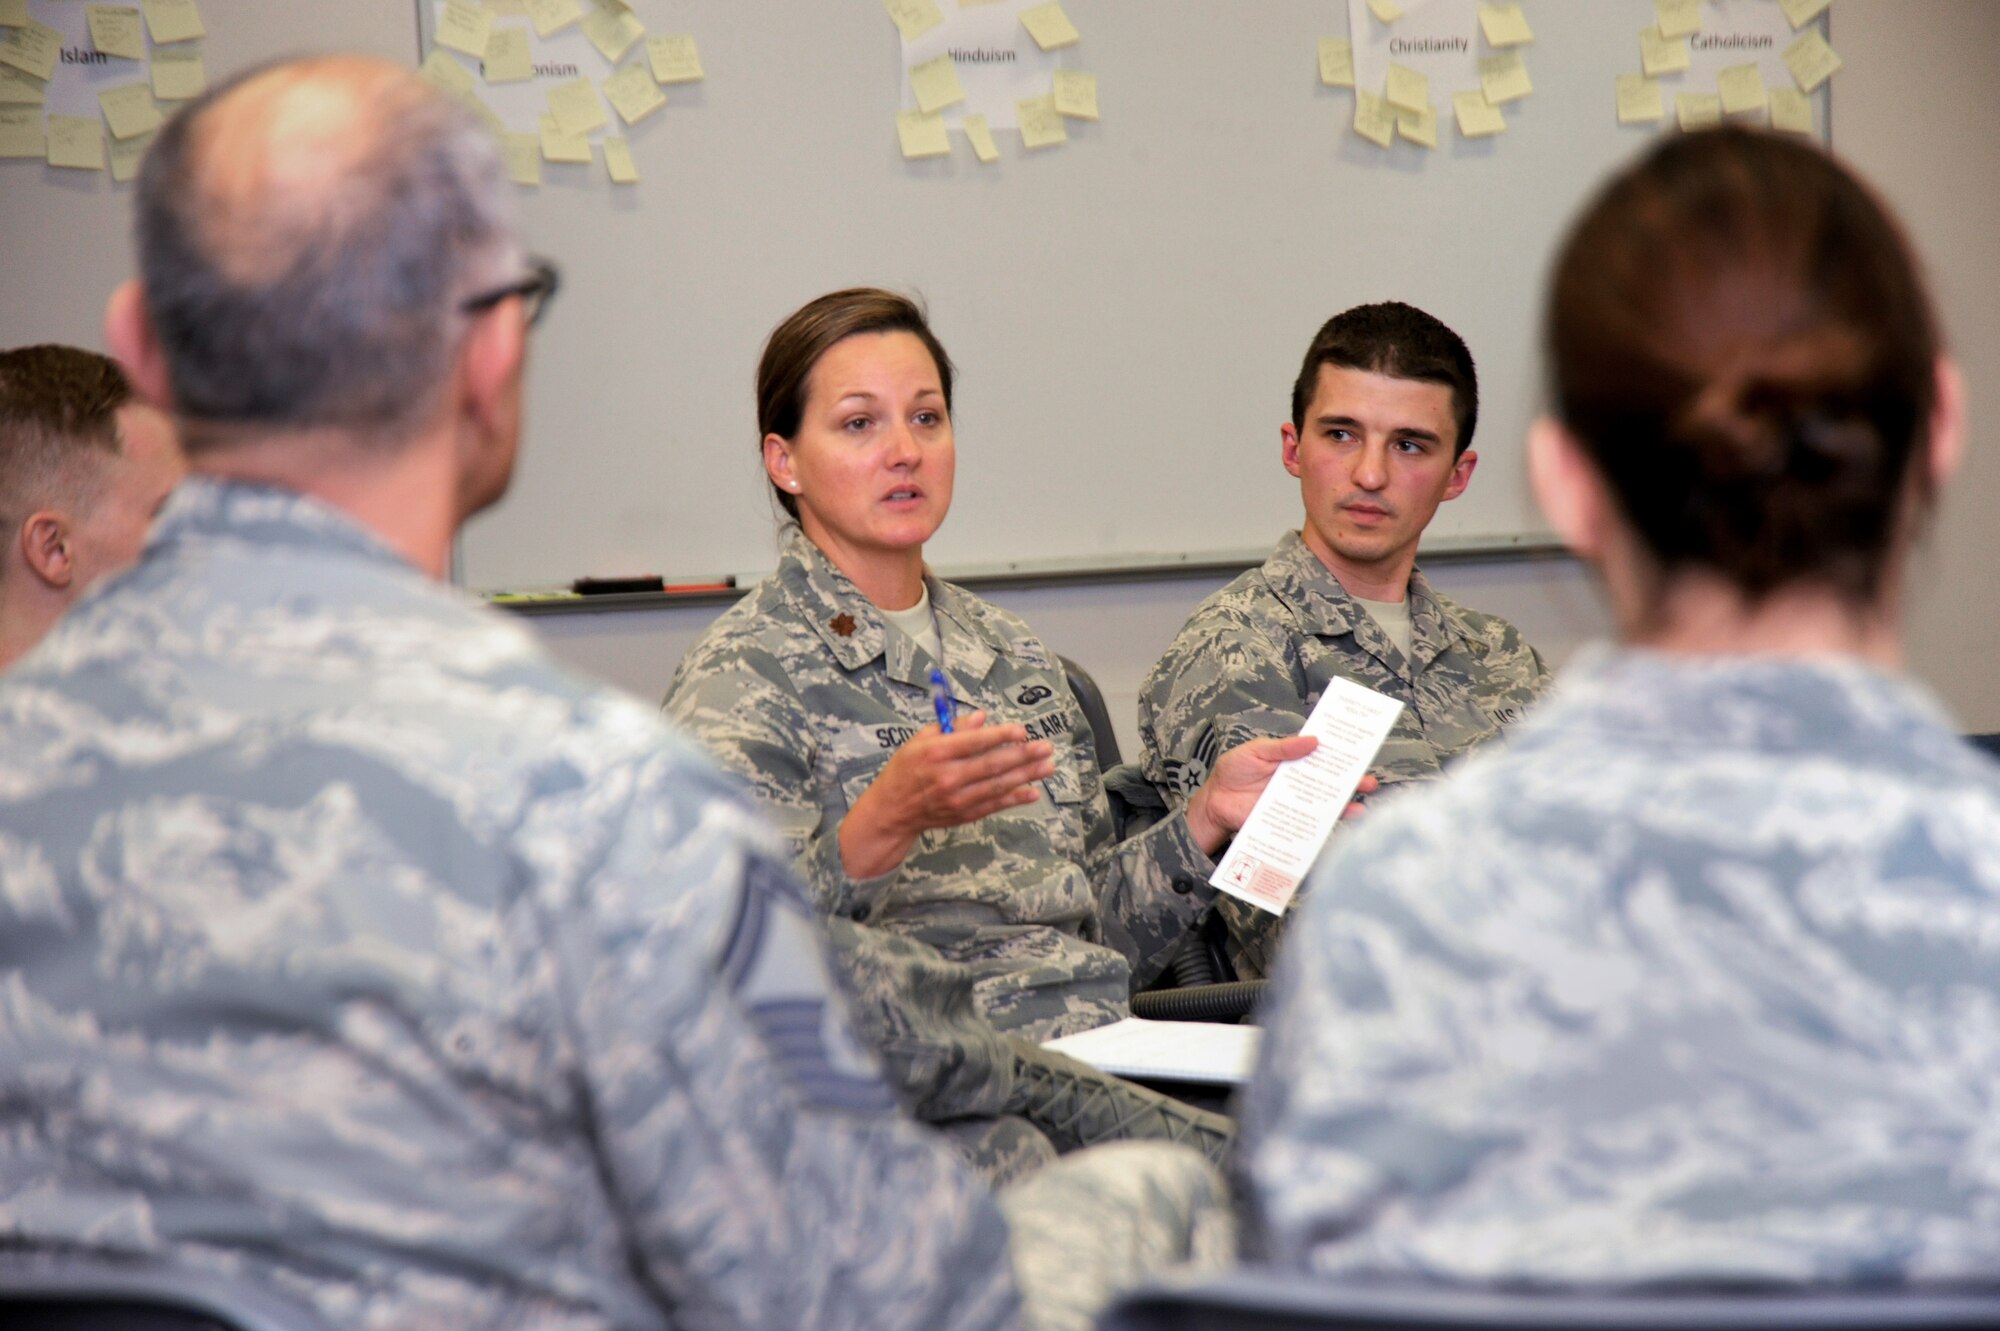 Oregon Air National Guard Maj. Lisa Scott, the Equal Opportunity Director for the 142nd Fighter Wing, center, leads a discussion during the Unit Training Assembly, Dec. 07, 2014, Portland Air National Guard Base, Ore. The Diversity and Inclusion Counsel helps foster communication by recognizing that a diverse set of experiences, perspectives, and backgrounds are crucial to mission success. (U.S. Air National Guard photo by Tech. Sgt. John Hughel, 142nd Fighter Wing Public Affairs/Released)